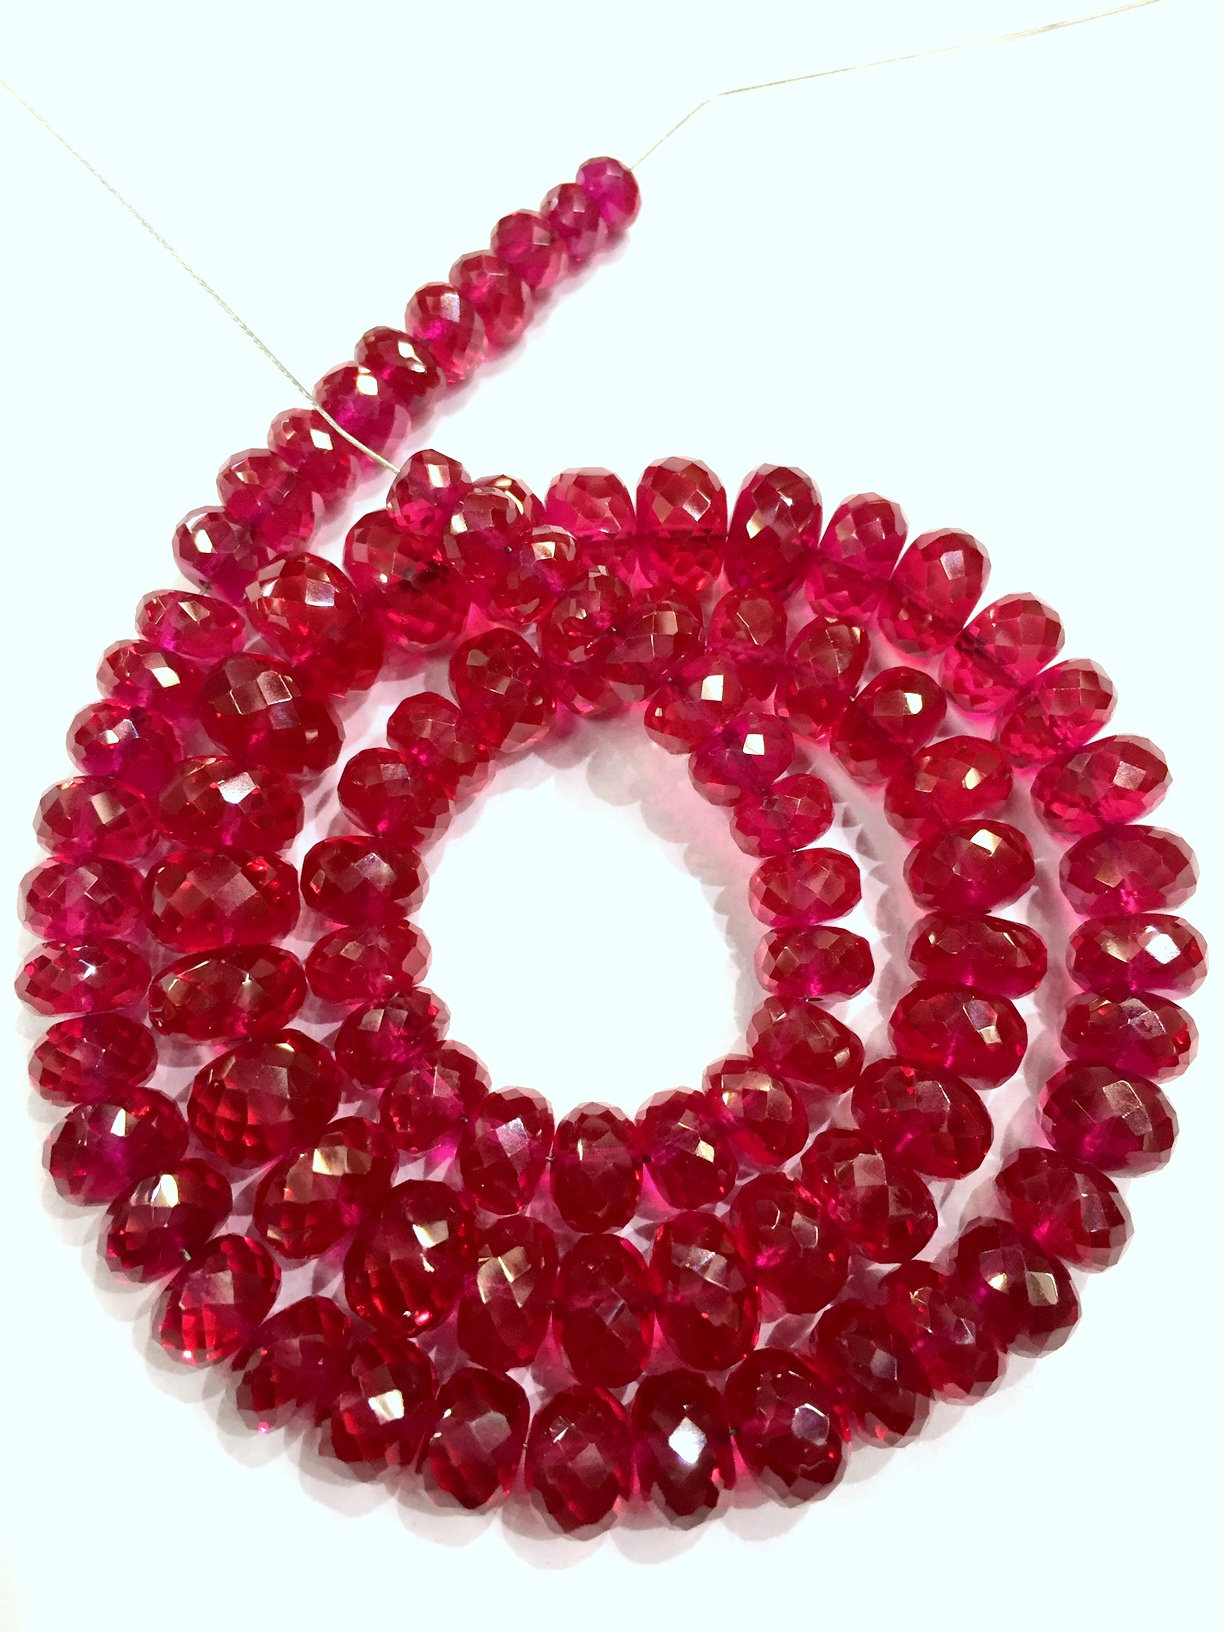 Amazing Red Corundum Faceted Rondelle Beads Ruby Corundum faceted beads Gemstone for Necklace Jewelry making SALE 7 inch strand 4-4.5 mm